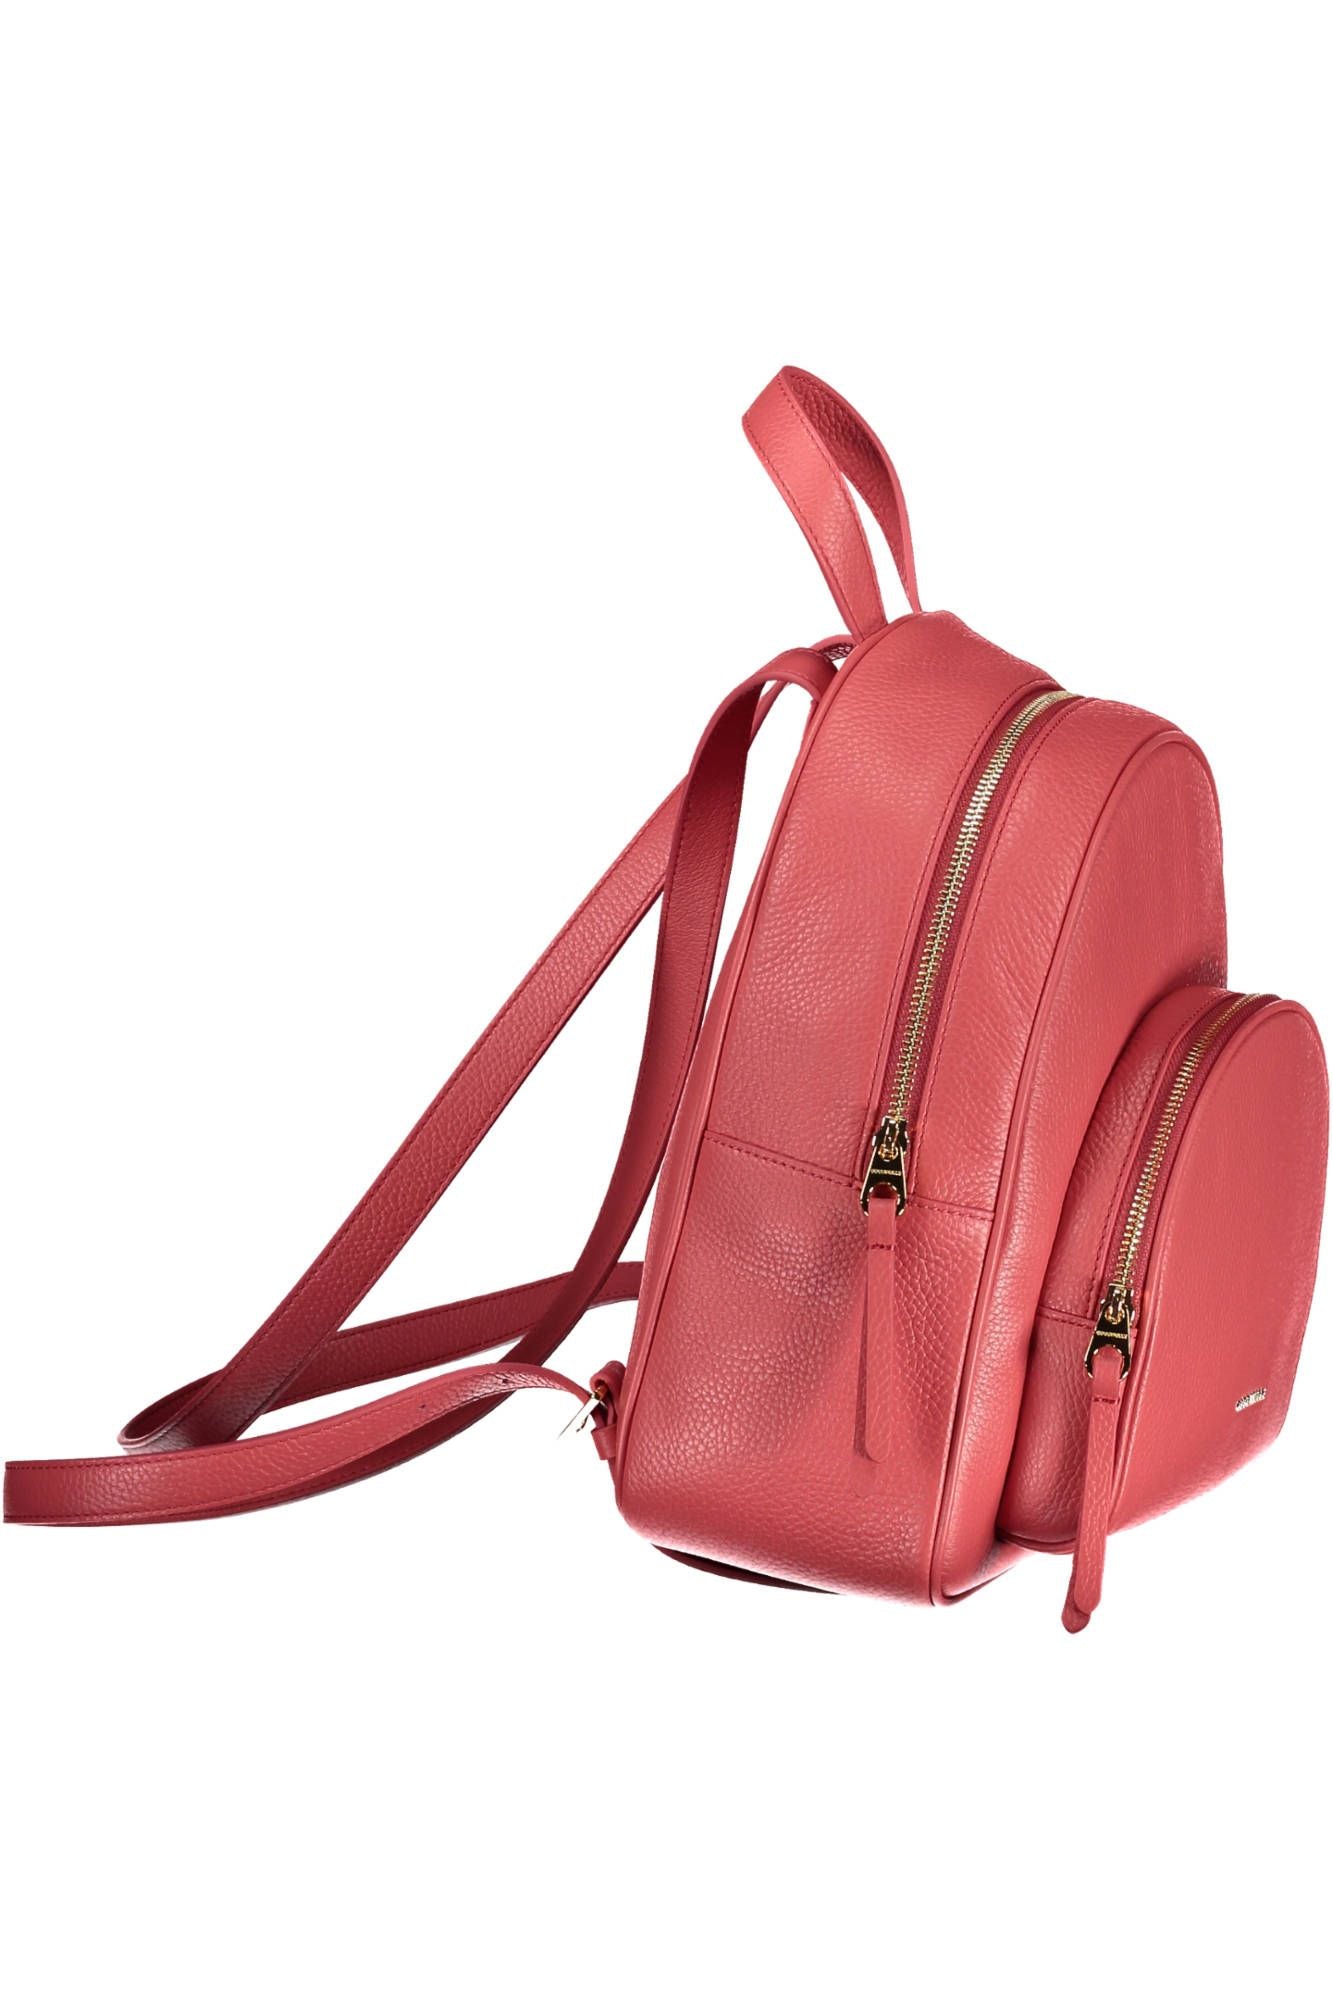 Elegant Pink Leather Backpack for Stylish Outings